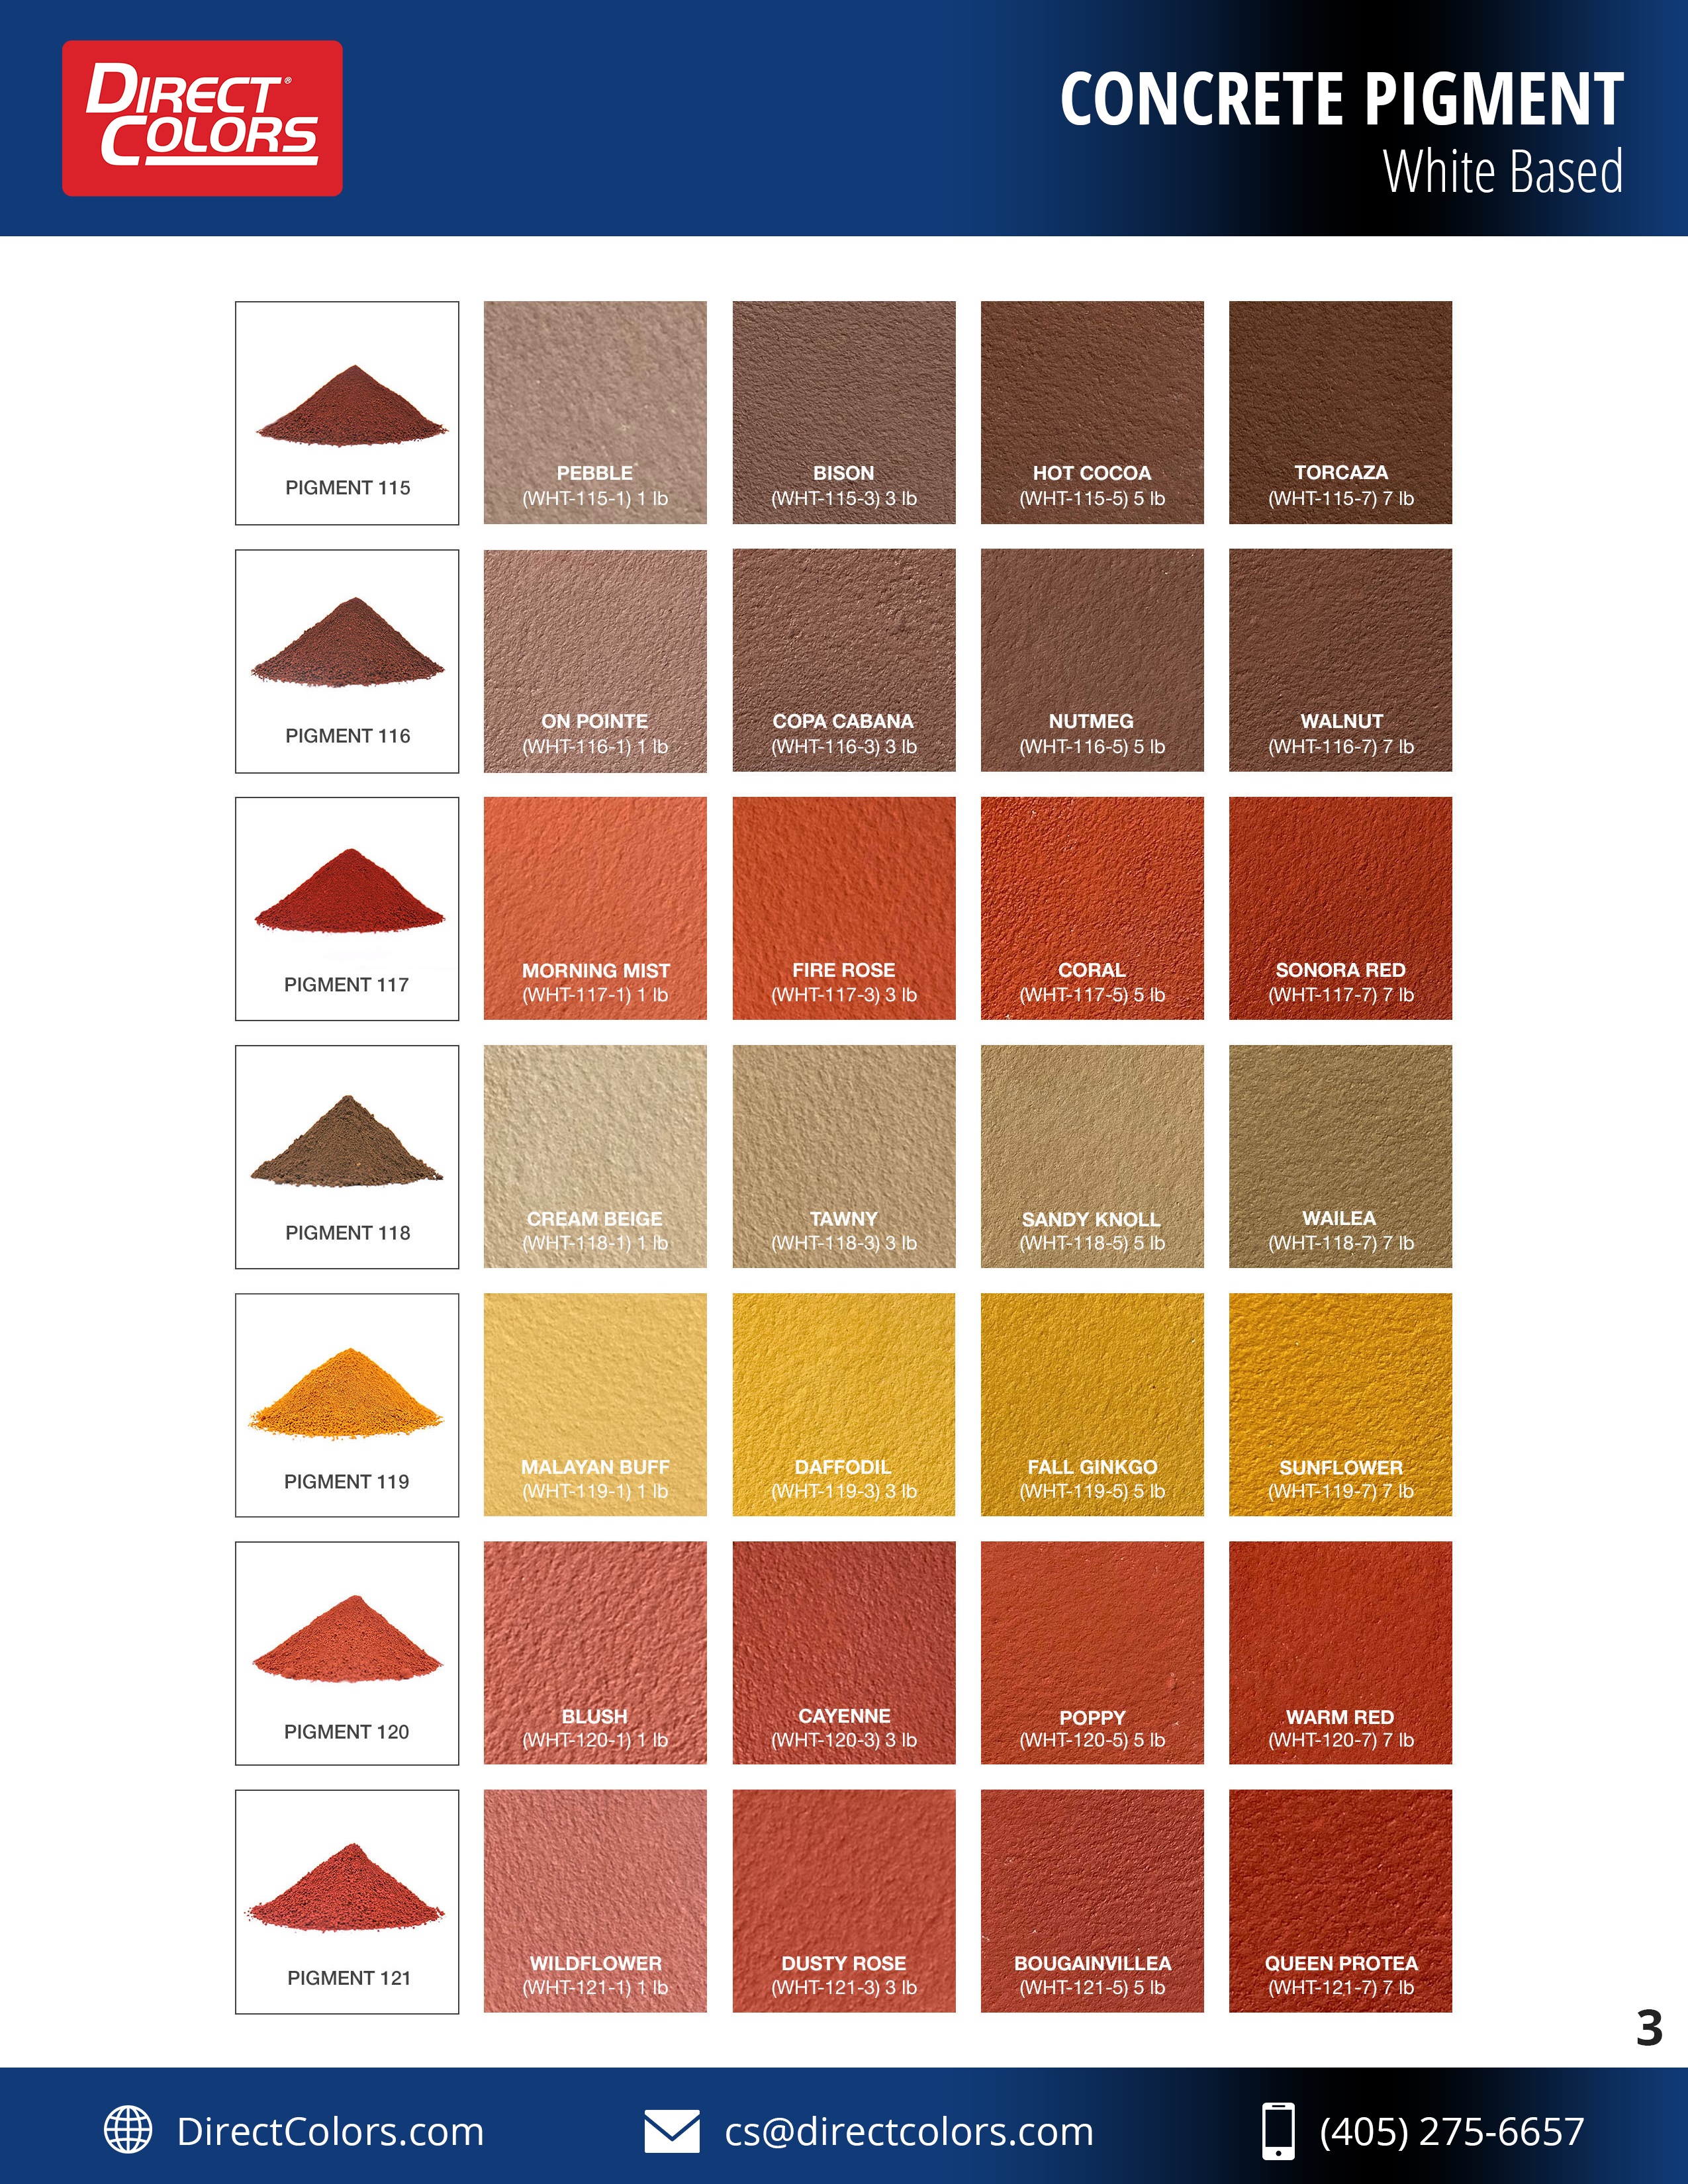 WHITE-BASED PIGMENTS - COLOR CHART